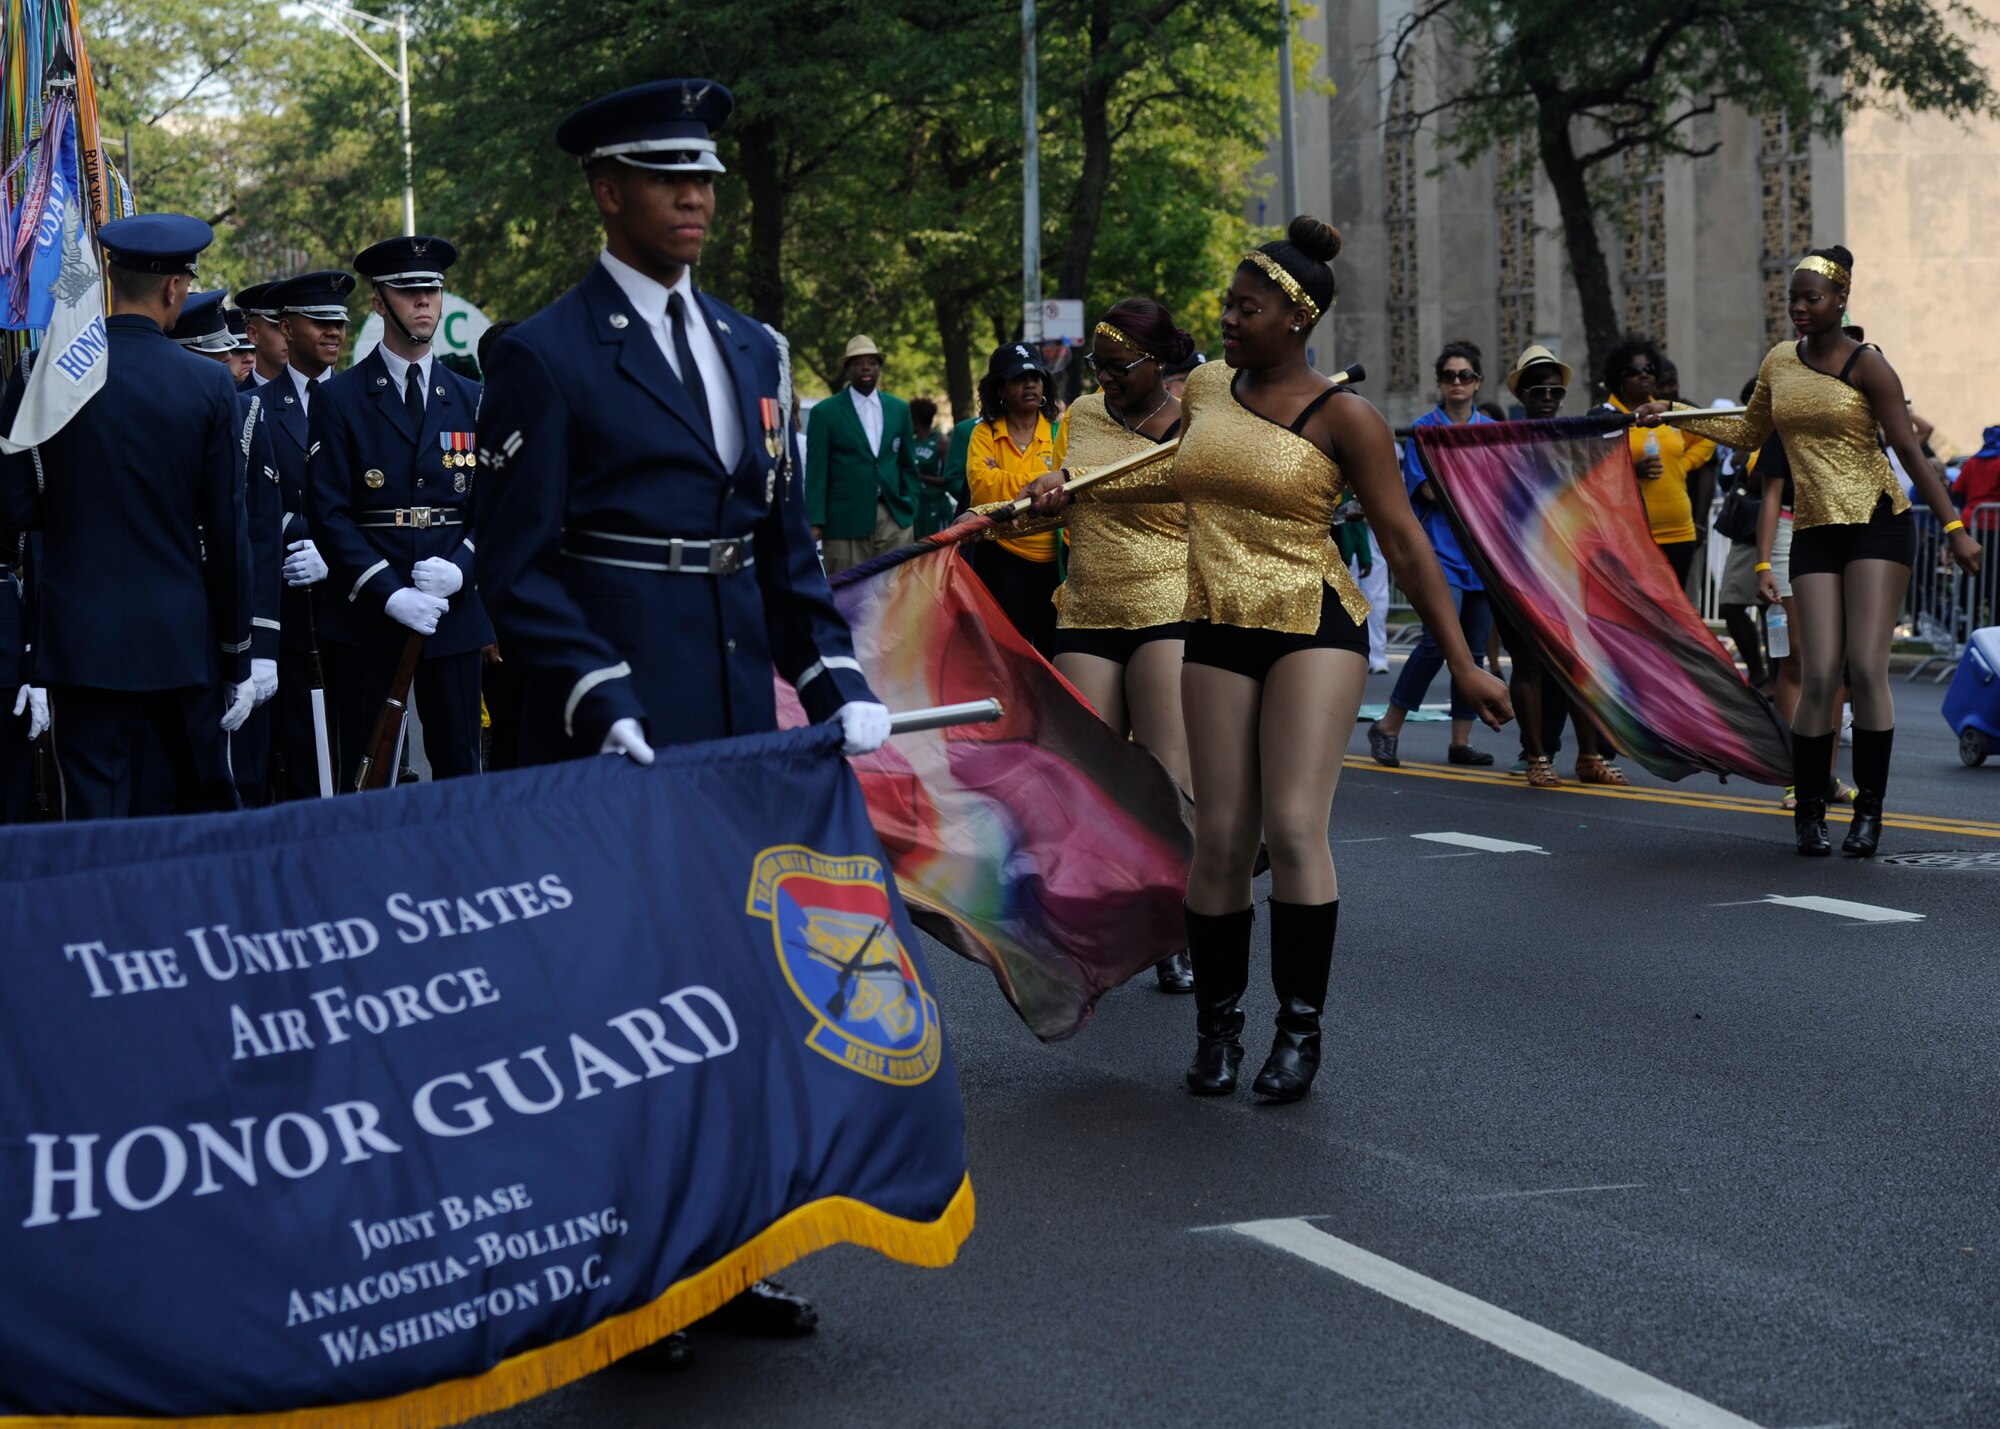 Airman 1st Class Shawn Skeetfoster, United States Air Force pallbearer waits for the Bud Billiken Parade to start in Chicago, Il., August 9, 2014. The Bud Billiken Parade is the second largest and longest continuous education parade in the U.S., highlighting the significance of education by providing underprivileged children the chance to be in the spotlight. (U.S. Air Force photo/ Senior Airman Nesha Humes)